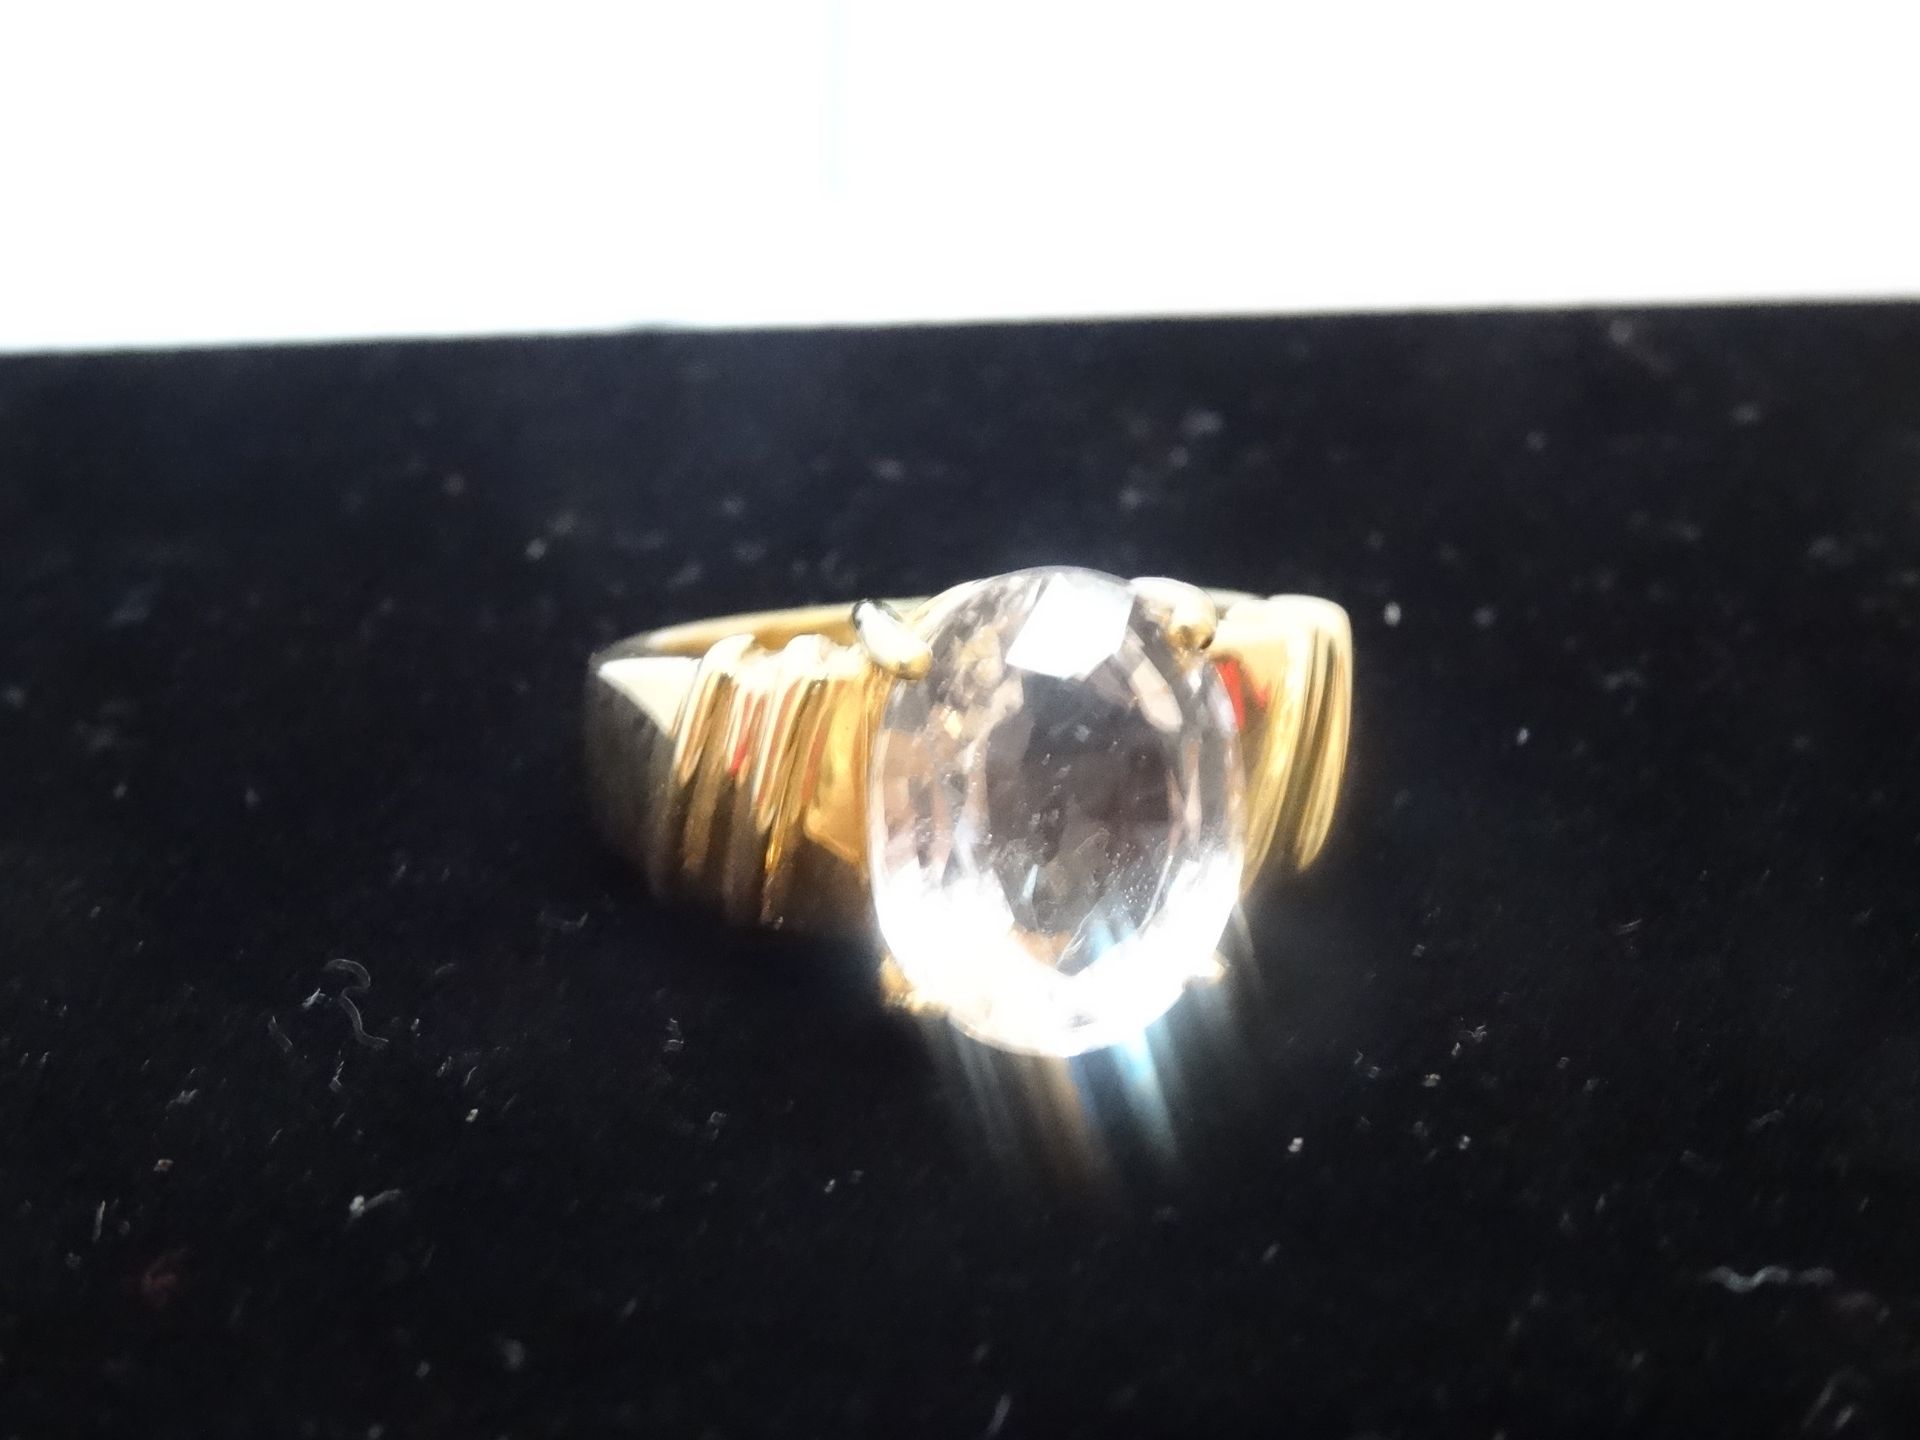 18 Carat Yellow Gold Ring With Clear Stone Ring. Total Piece Weight 8.6 Grams - Image 4 of 4